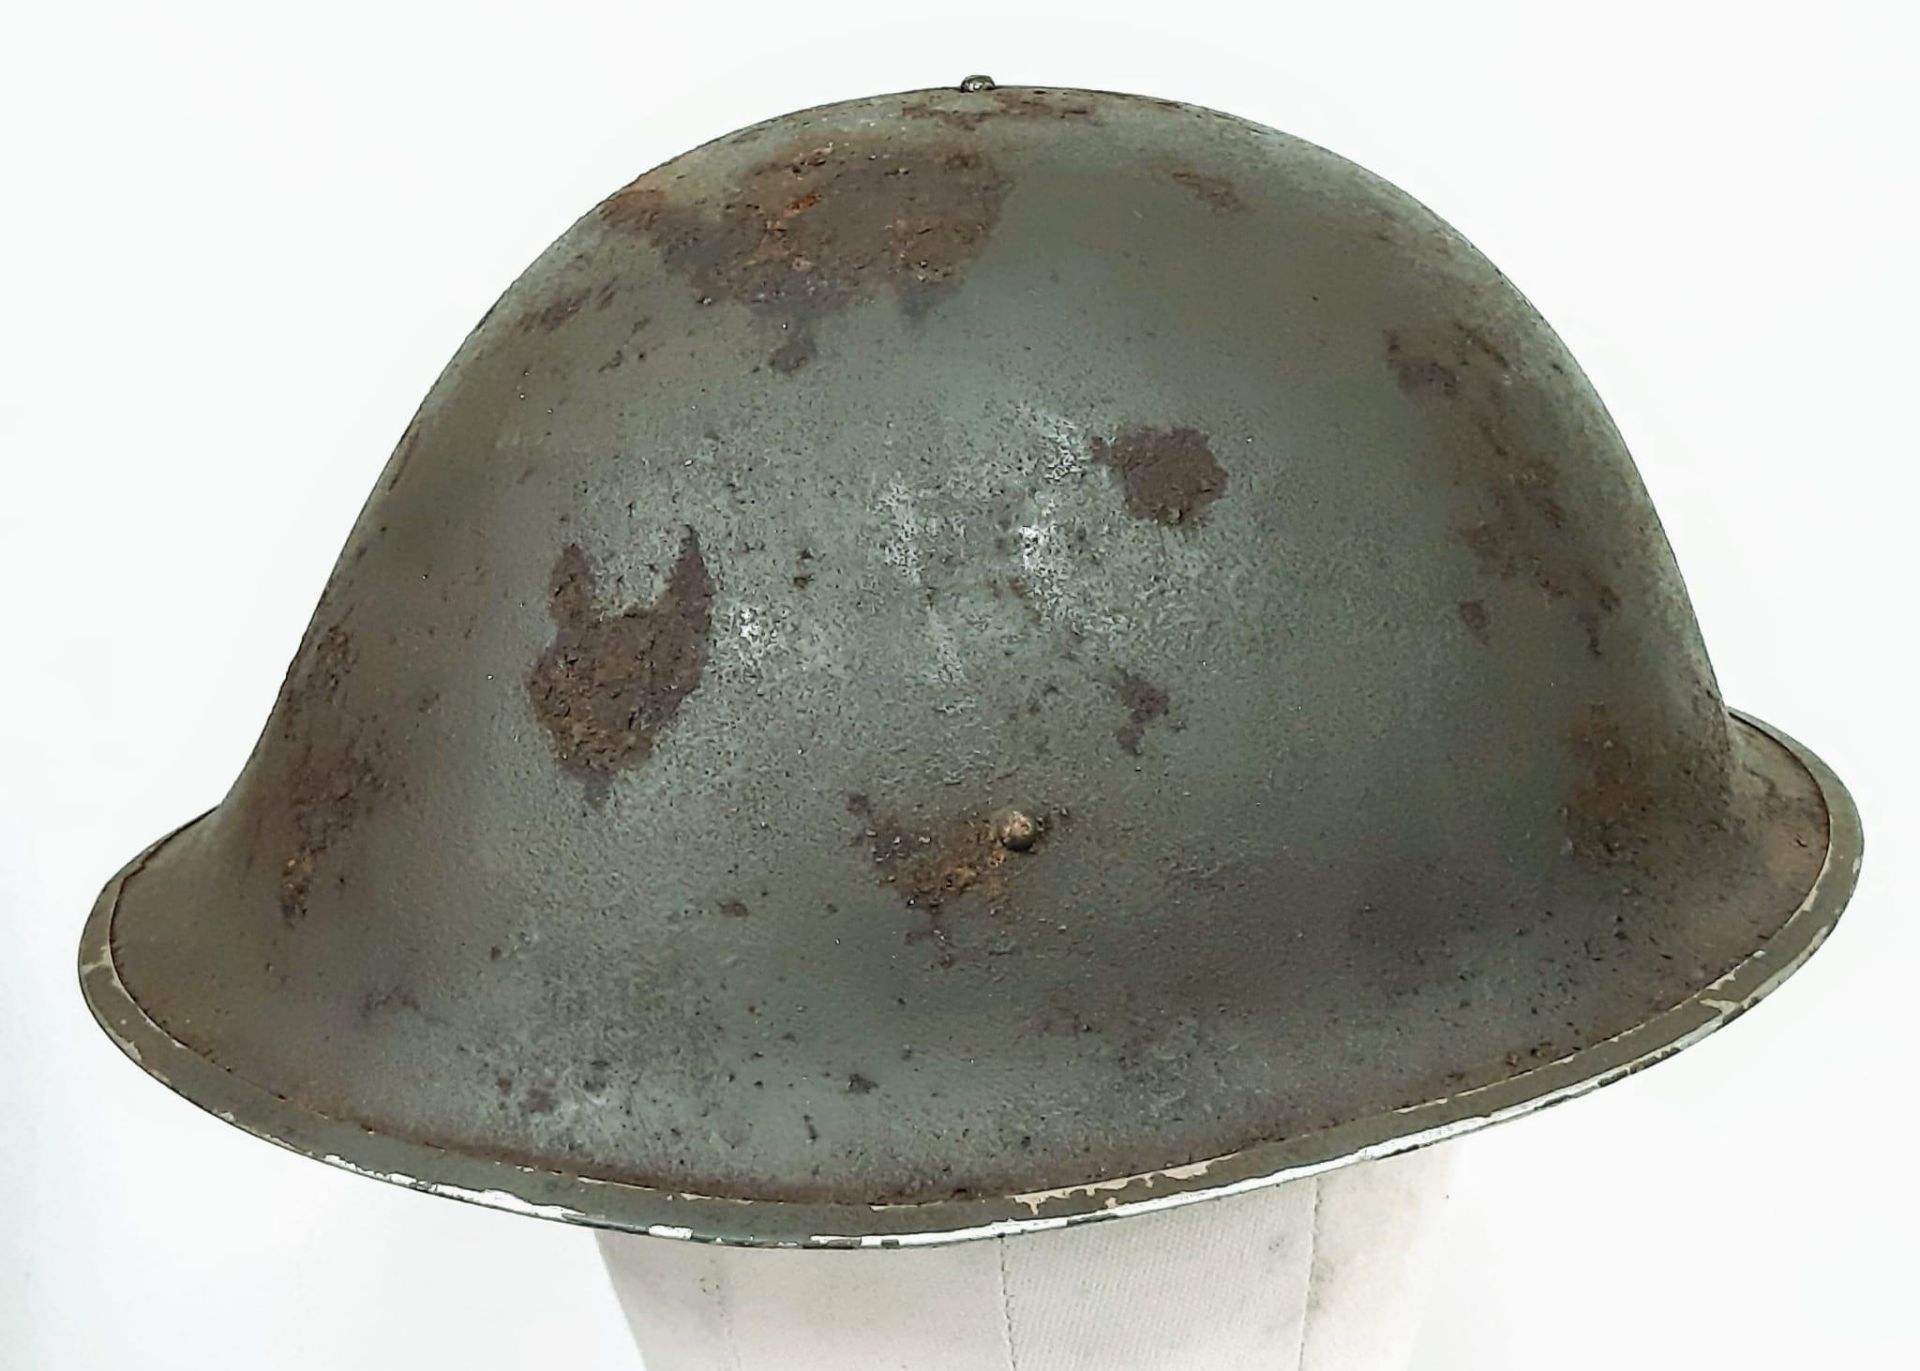 WW2 British 44 Pattern “Turtle” D-Day Helmet and liner, with insignia of the Royal Artillery. - Image 3 of 5